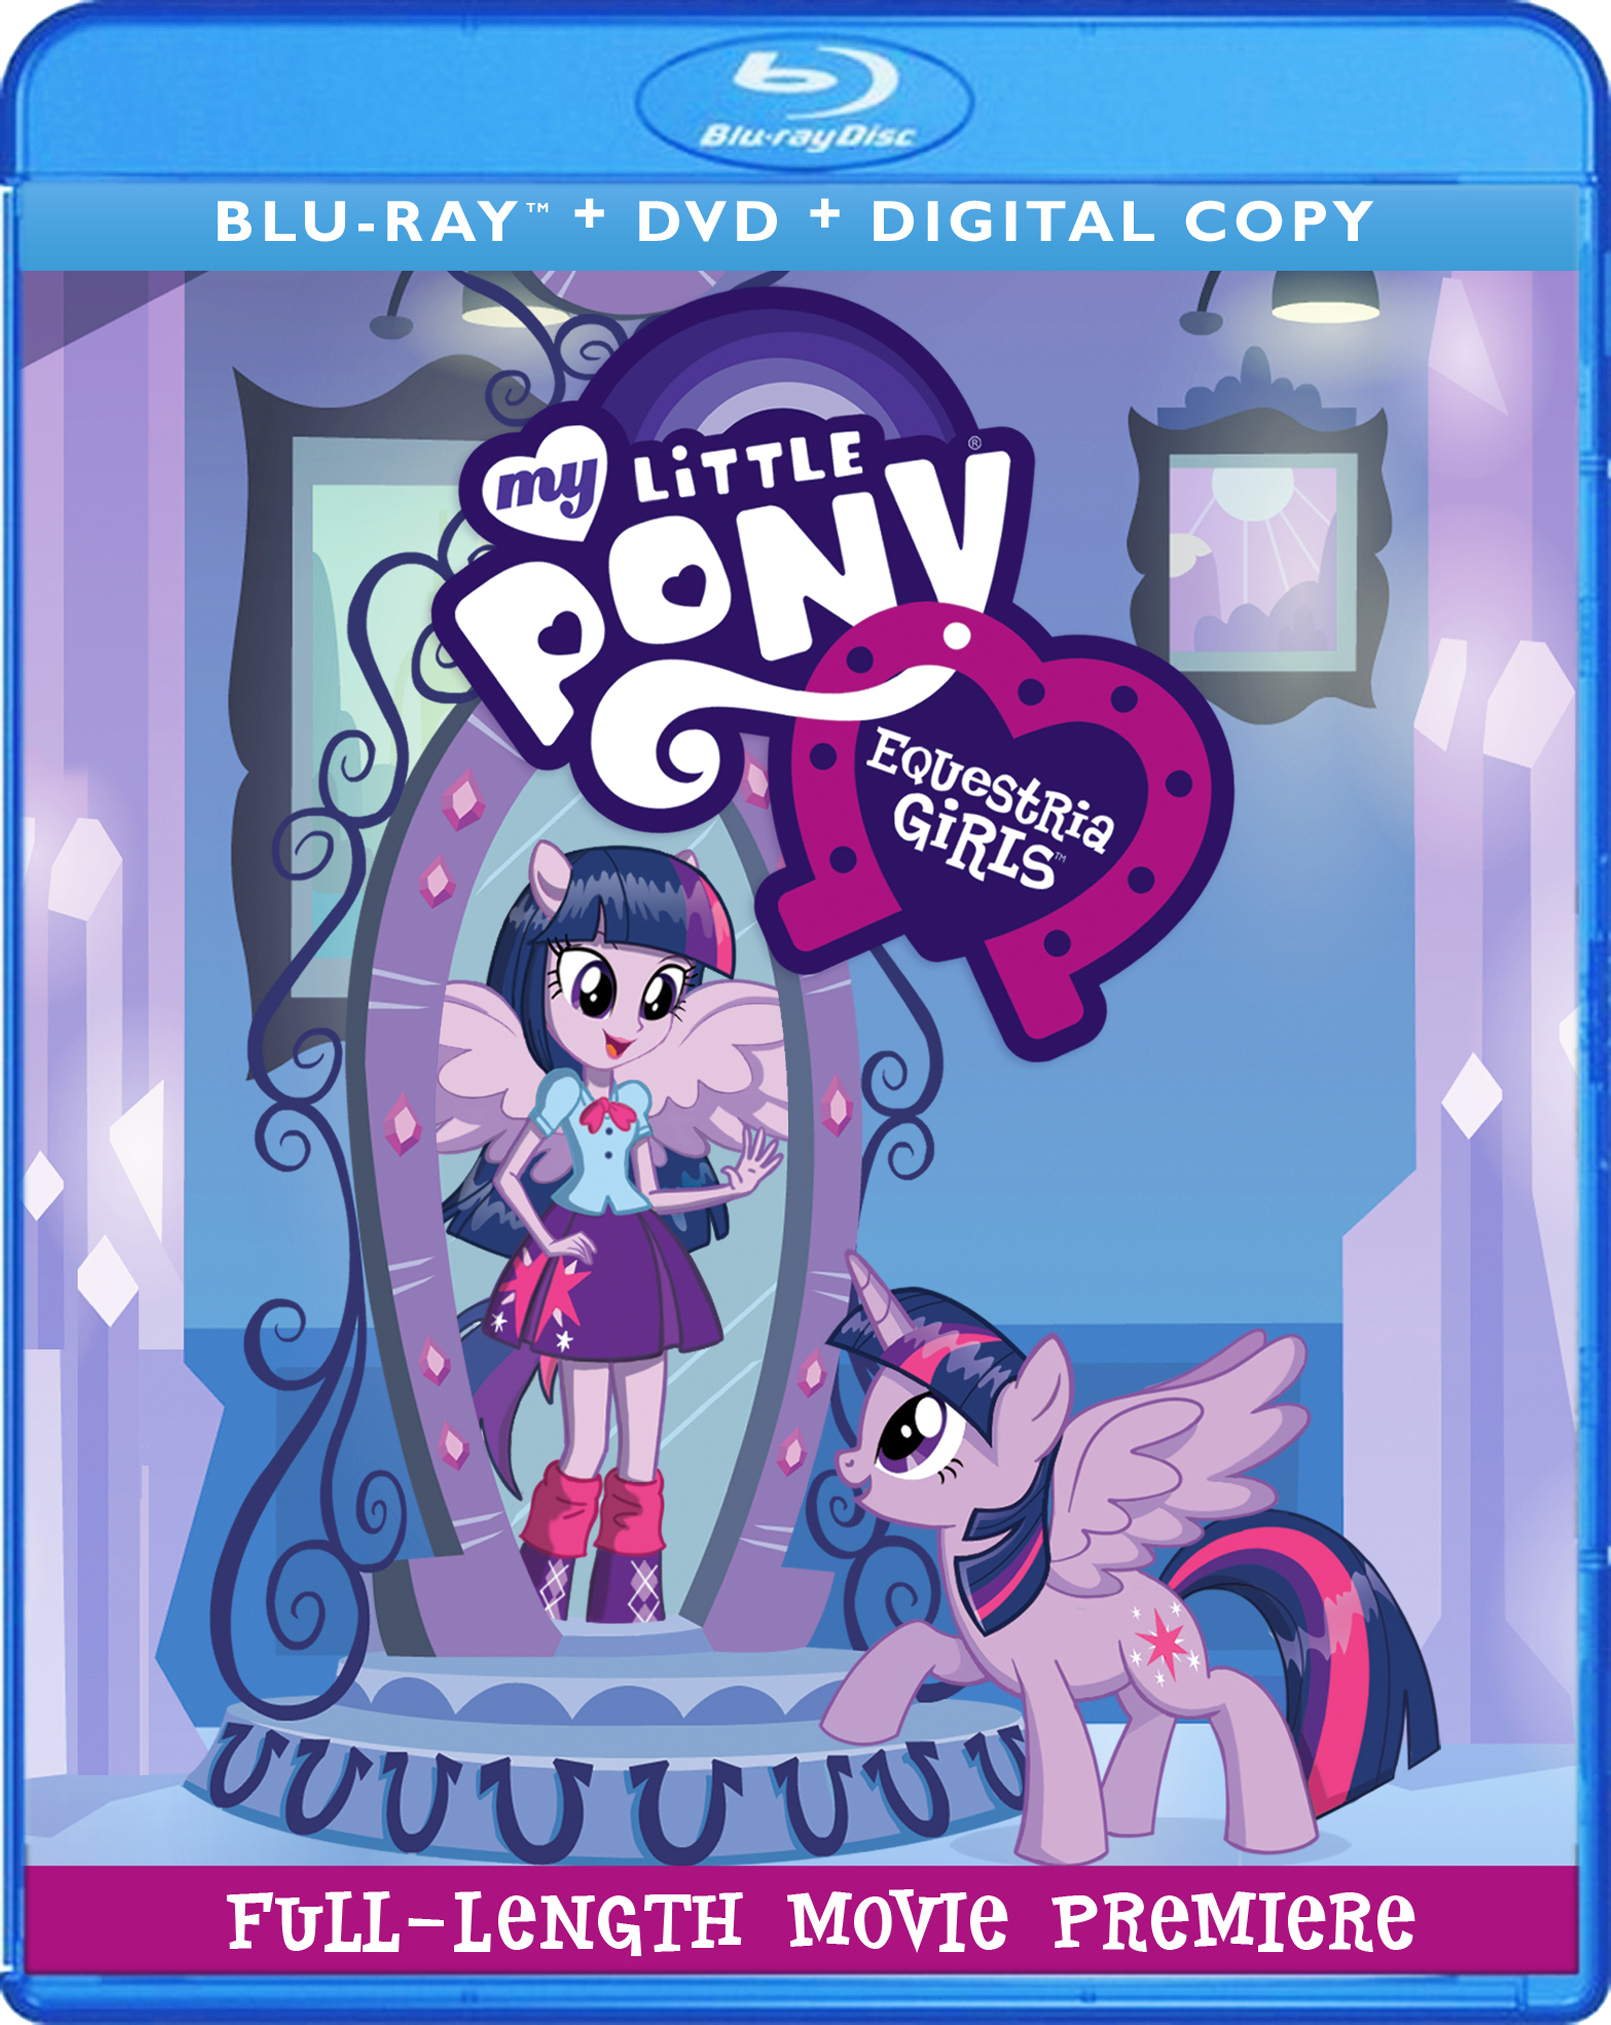 My Little Pony Equestria Girls Bluray Review Chip and Company